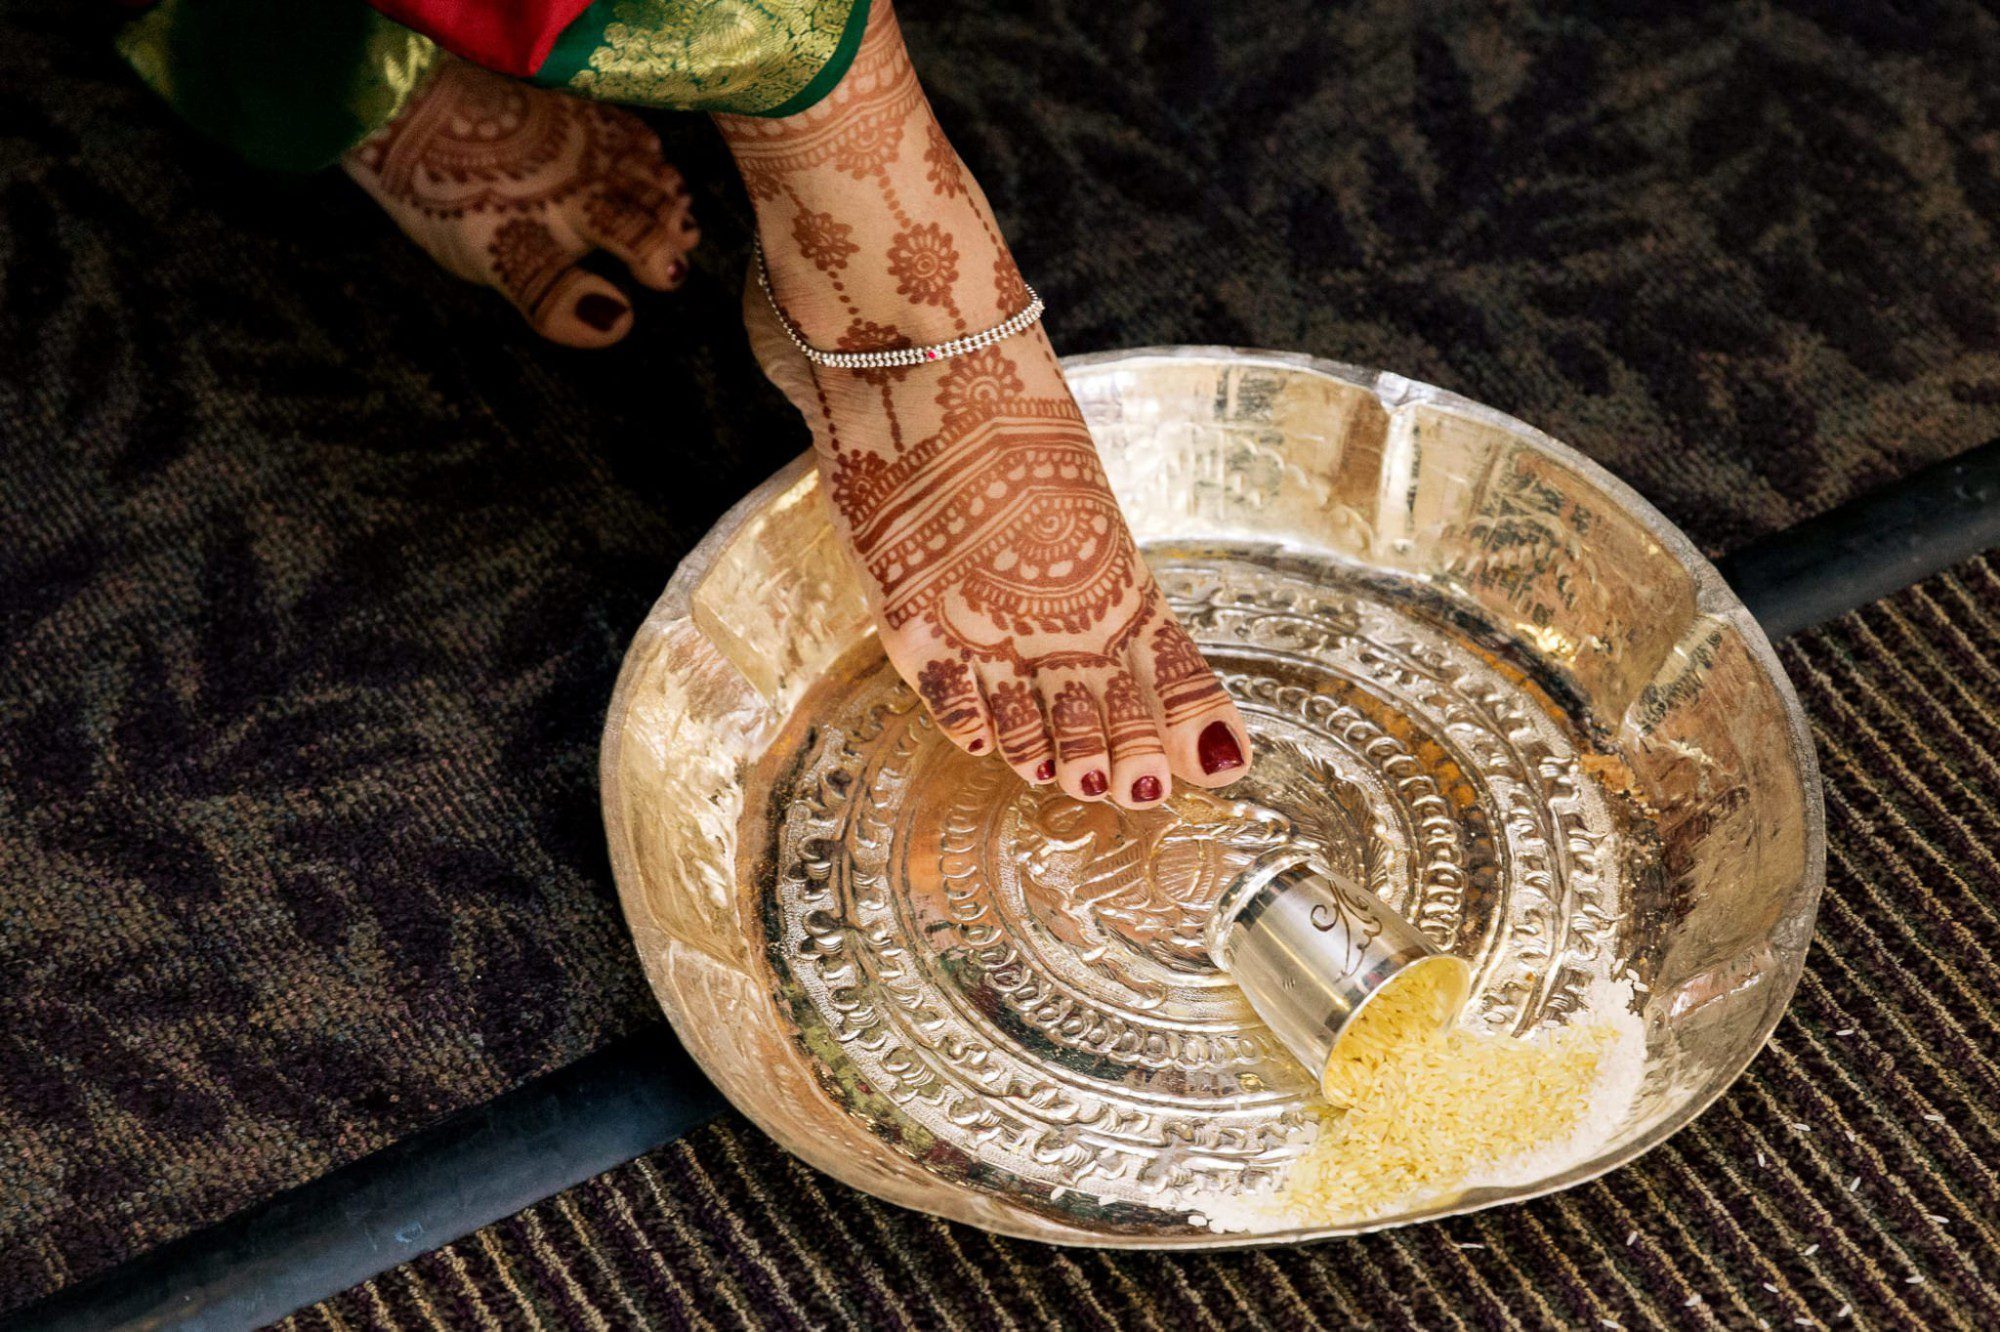 Indian ceremony tradition bride foot tipping over a cup of rice